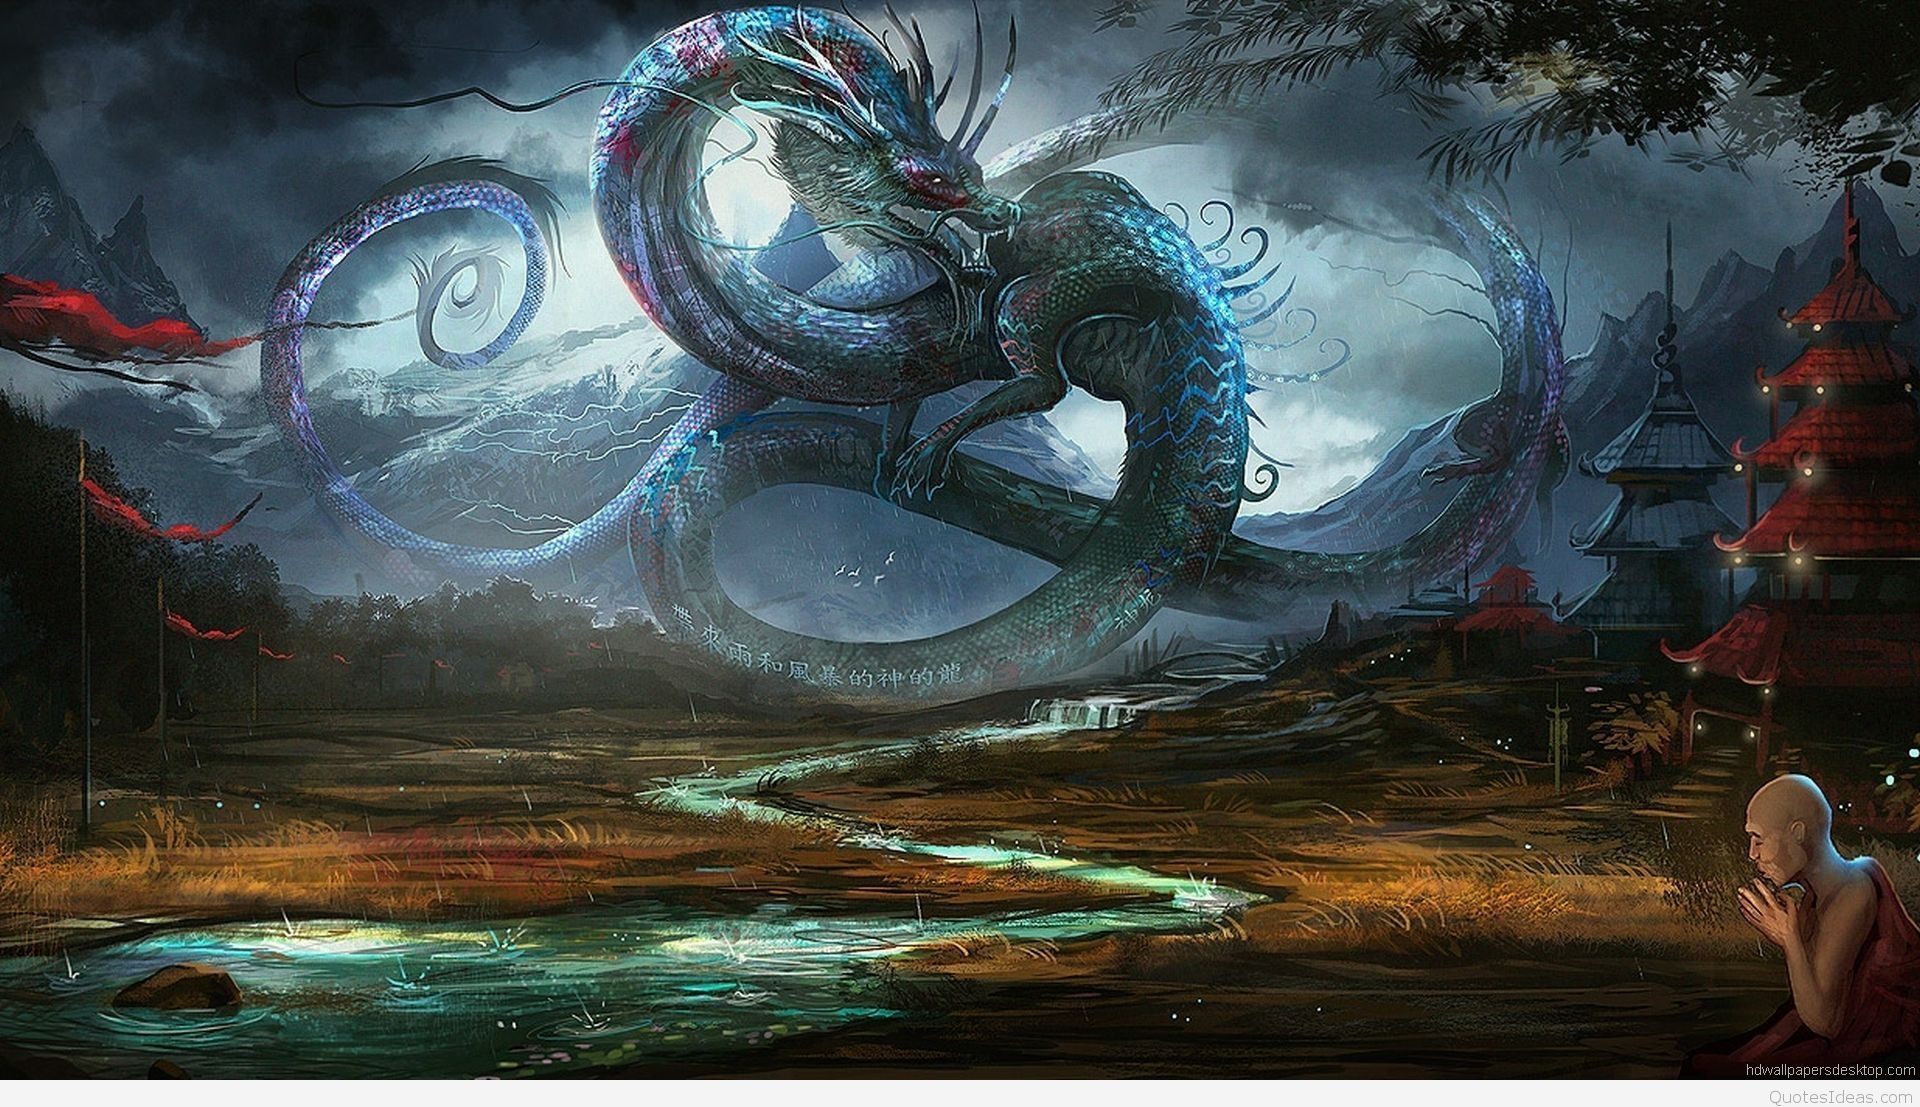 coolest wallpapers in the world,cg artwork,dragon,illustration,fictional character,mythology